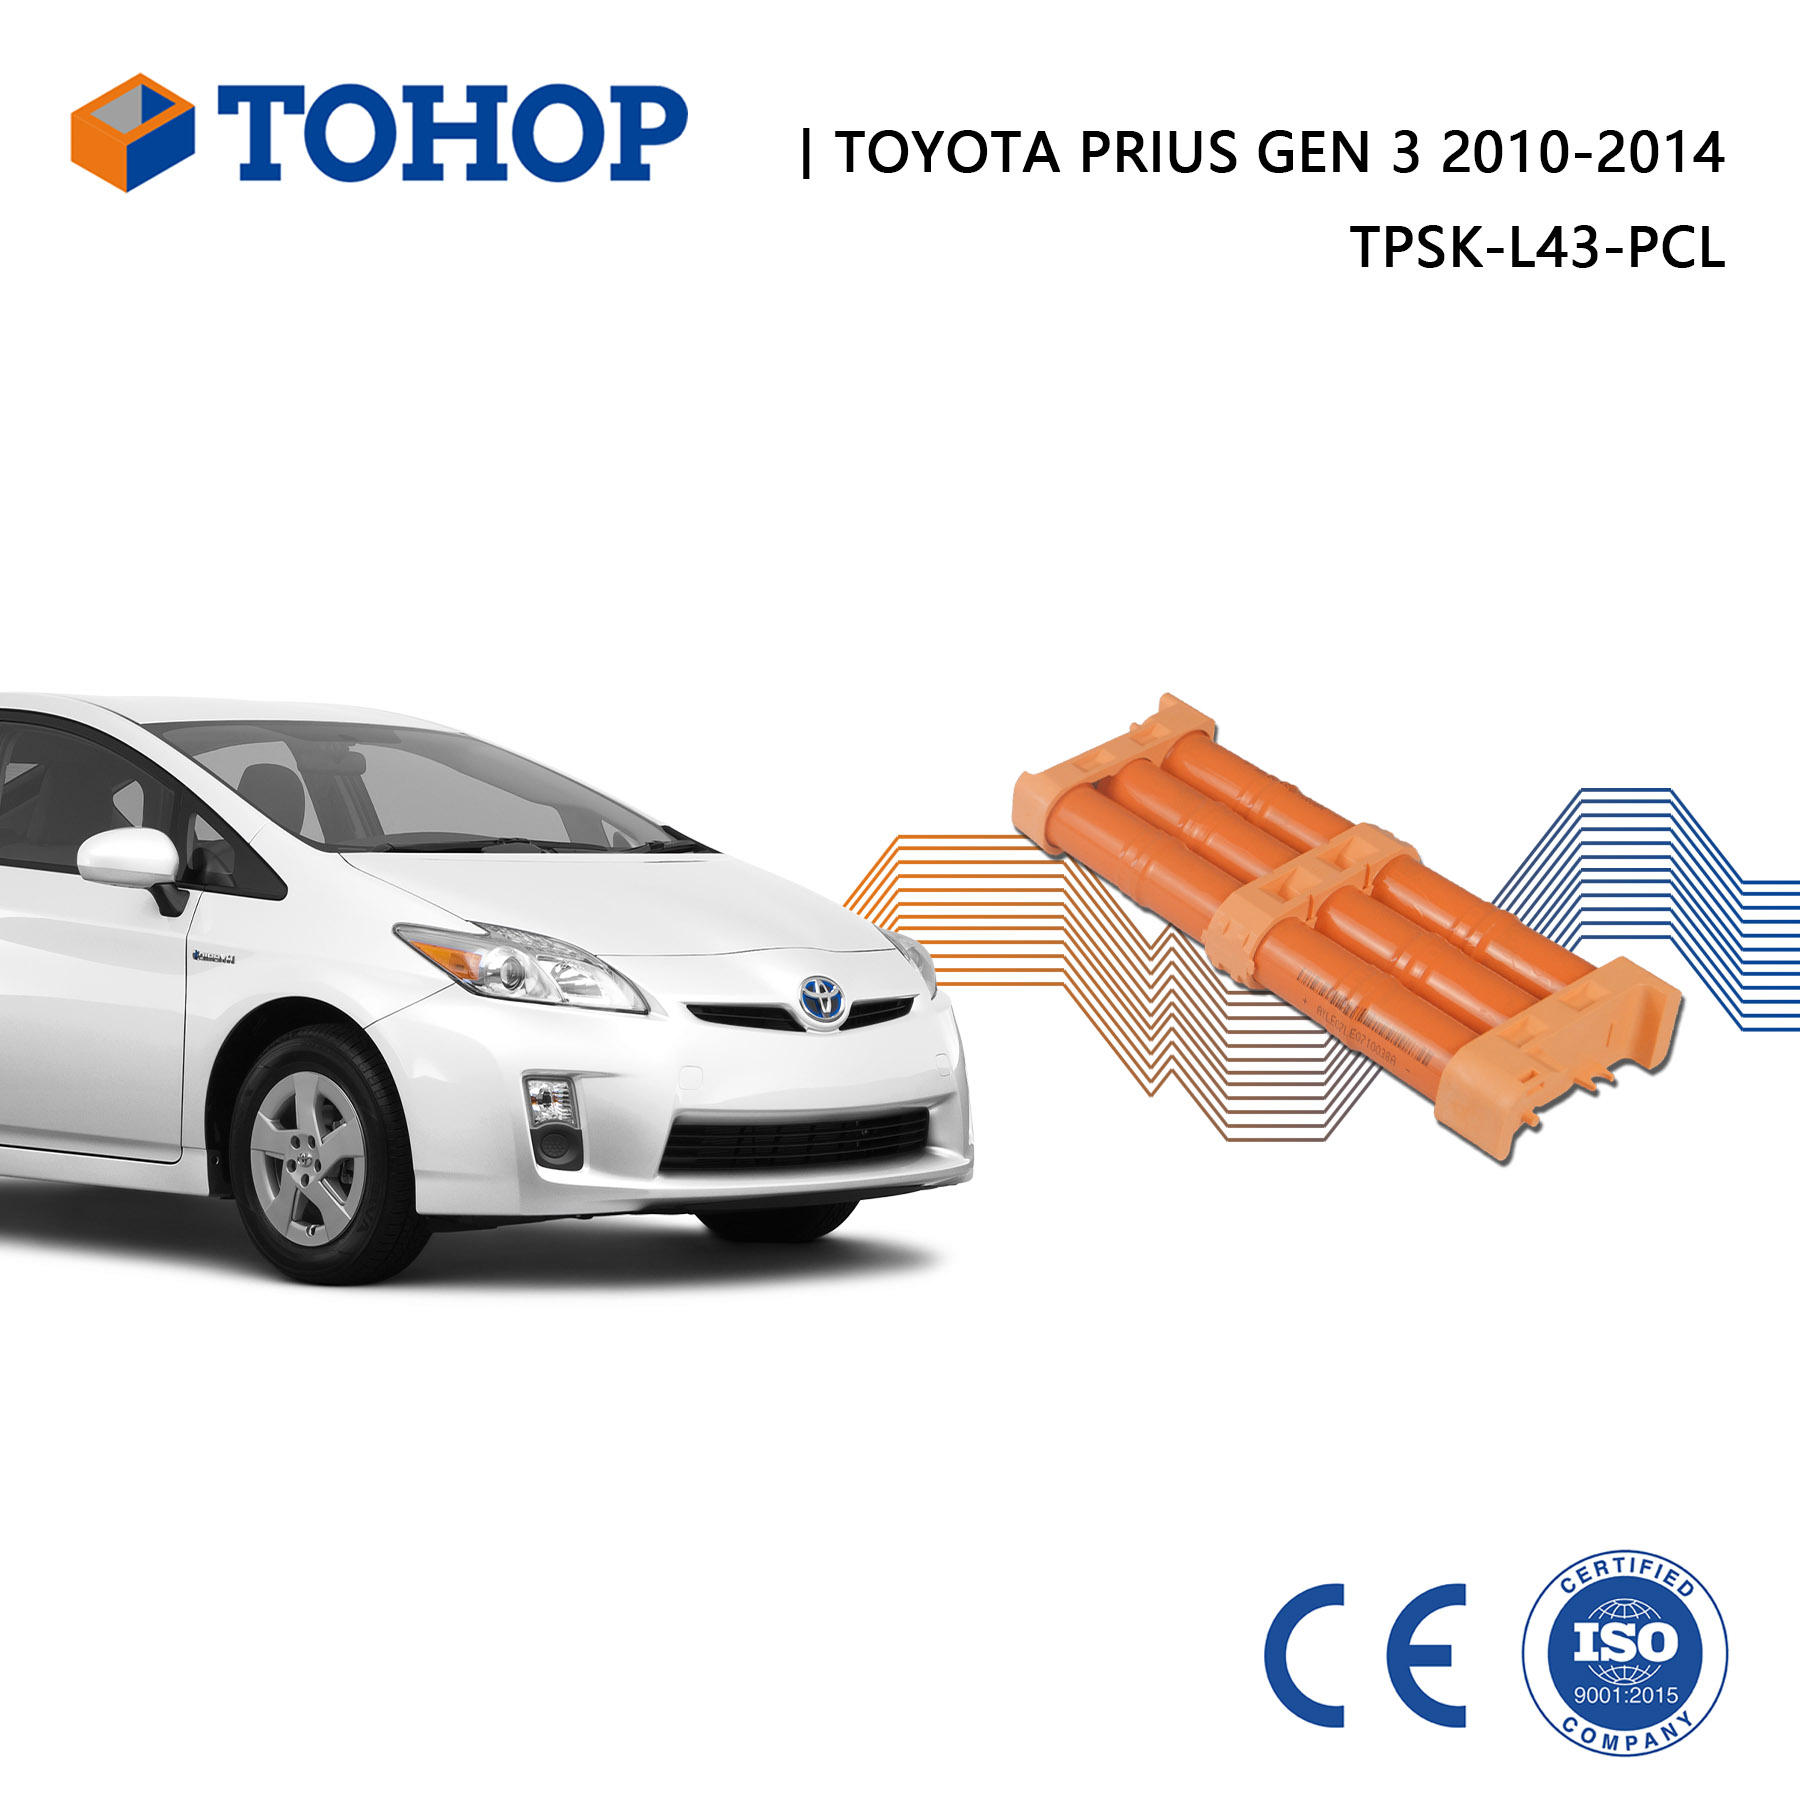 7.2V 14.4V 6.5Ah High Capacity Ni-MH Hybrid Car Battery For Replacement Toyota Prius Hybrid Battery